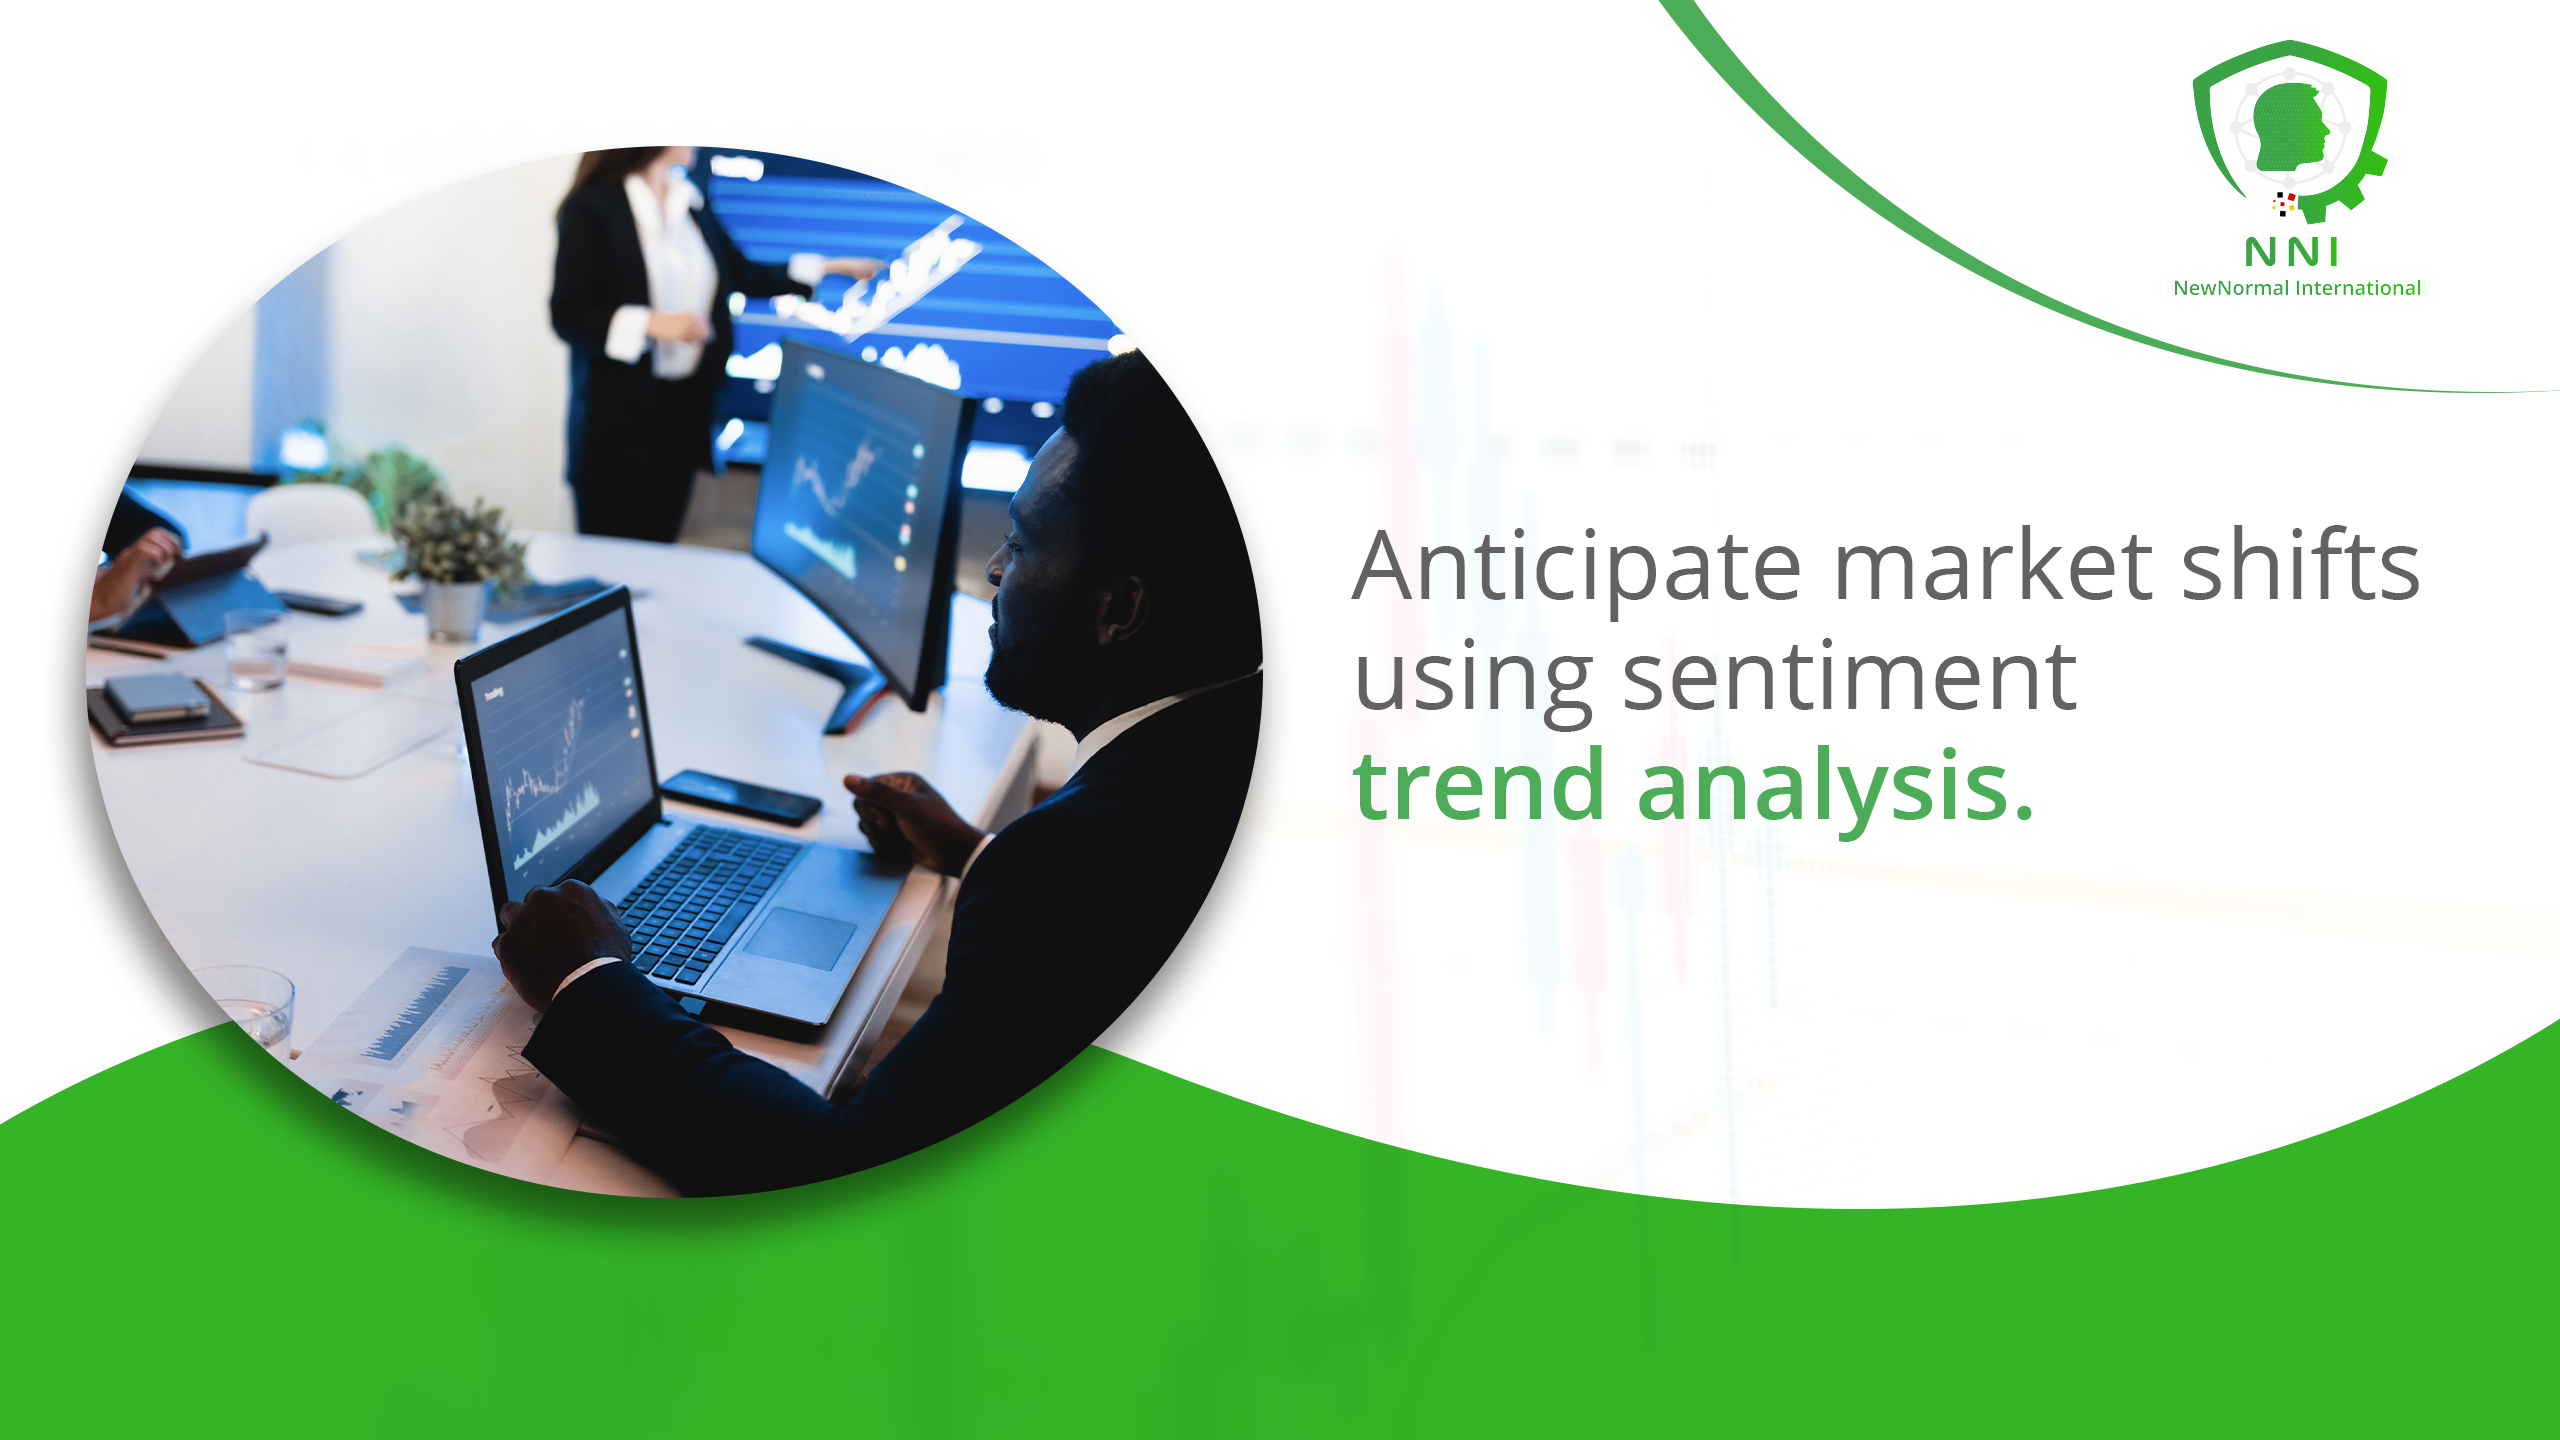 Anticipate market shifts using sentiment trend analysis